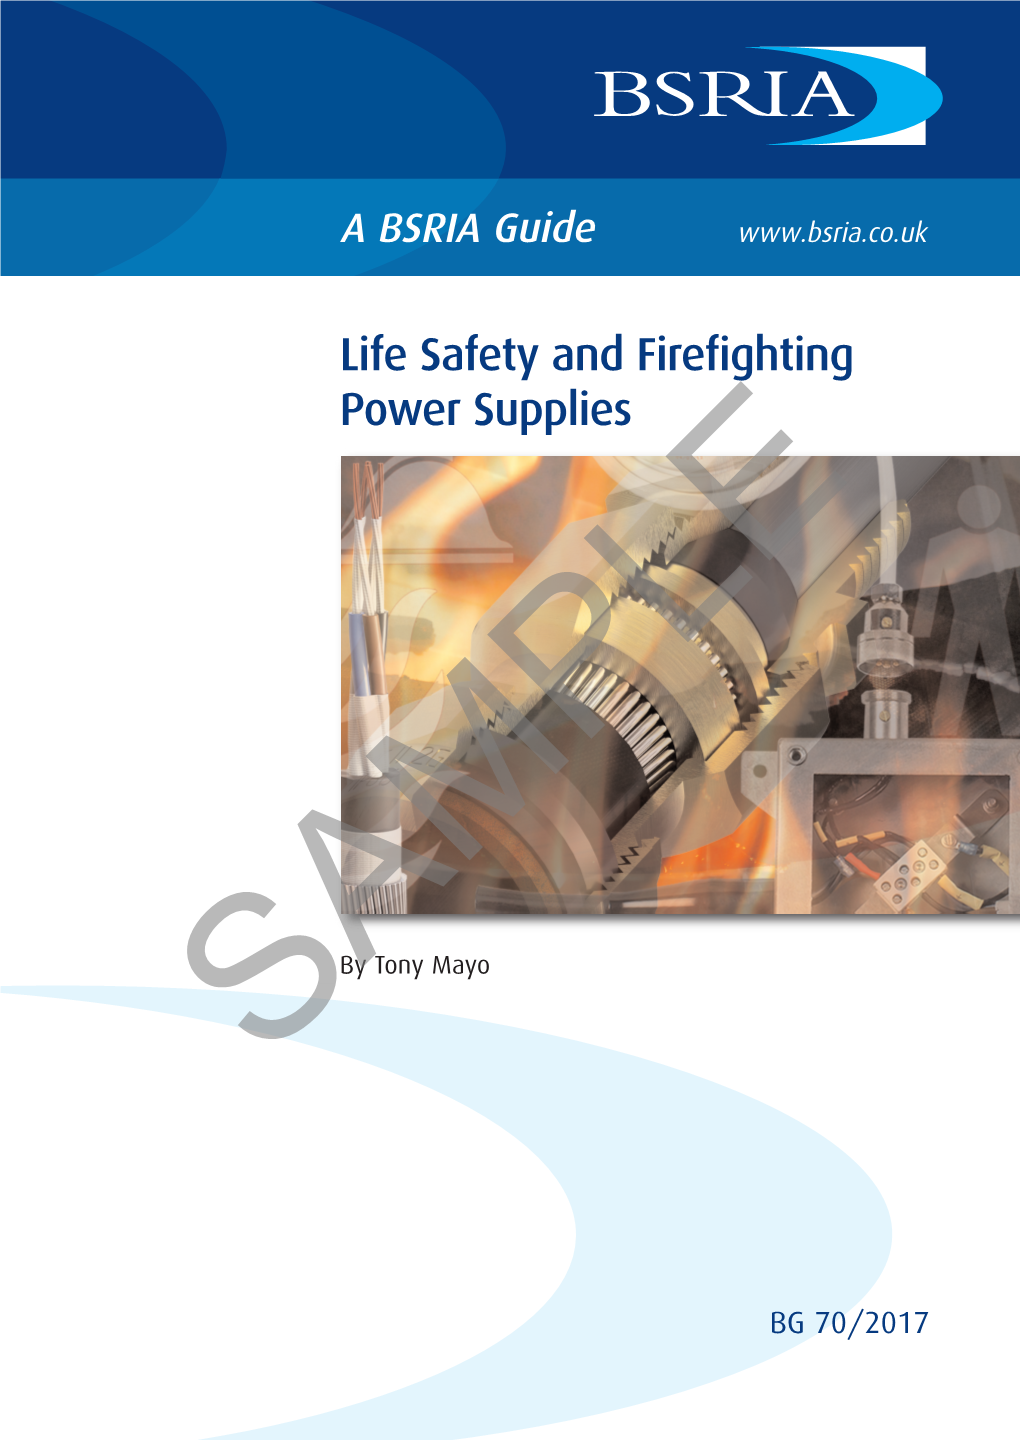 BG 70/2017 Life Safety and Firefighting Power Supplies SAMPLE